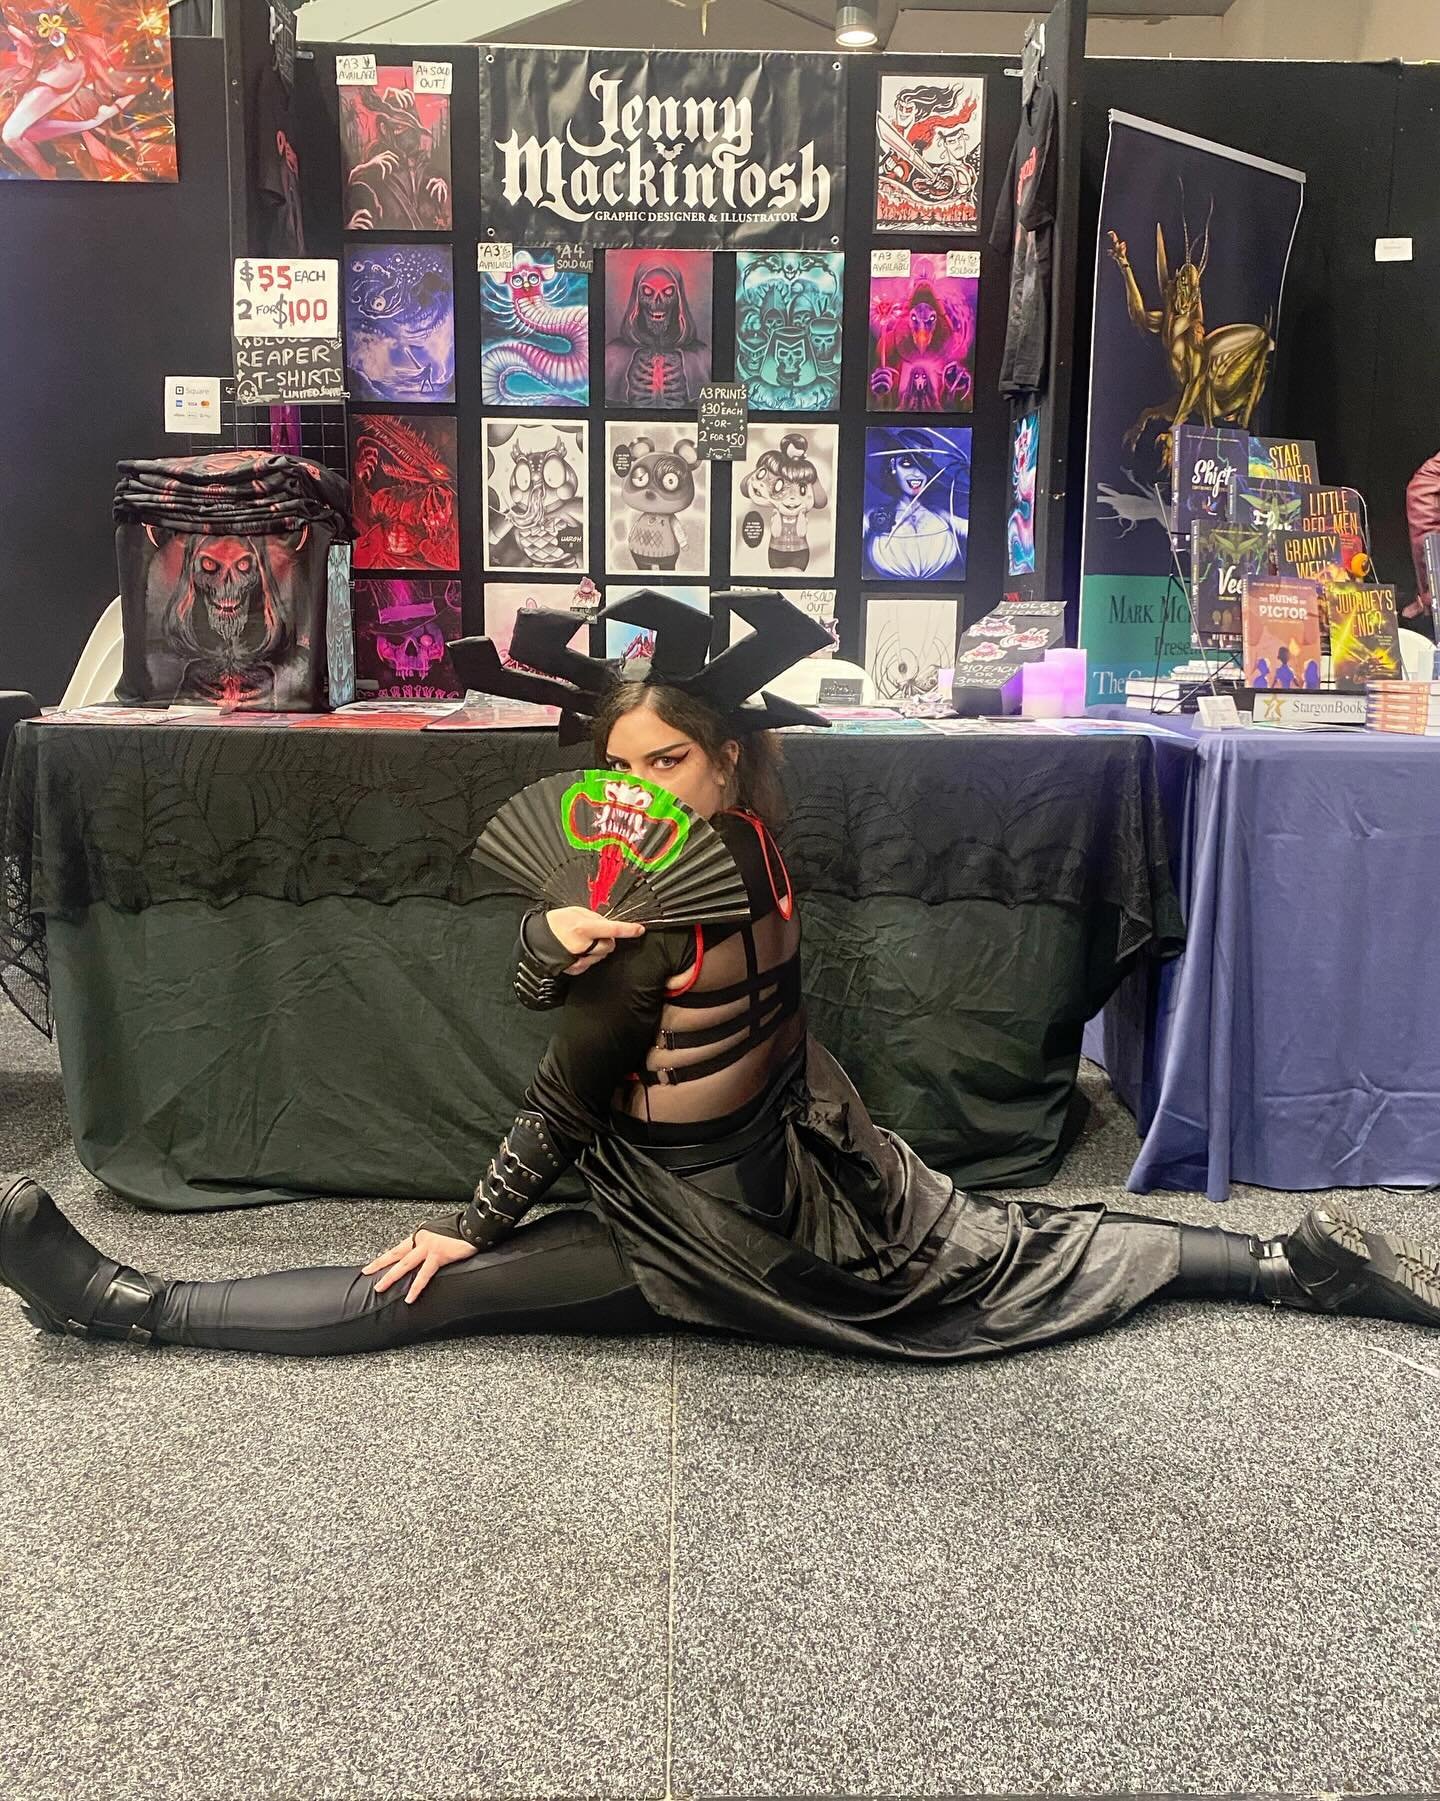 Thank you so much for having me Gold Coast @supanovaexpo !! It was my first time tabling at Goldnova and this weekend was filled with so many wholesome moments, so thank you for making my trip from WA worth it 🫶🏻❤️

Please take care of yourselves a